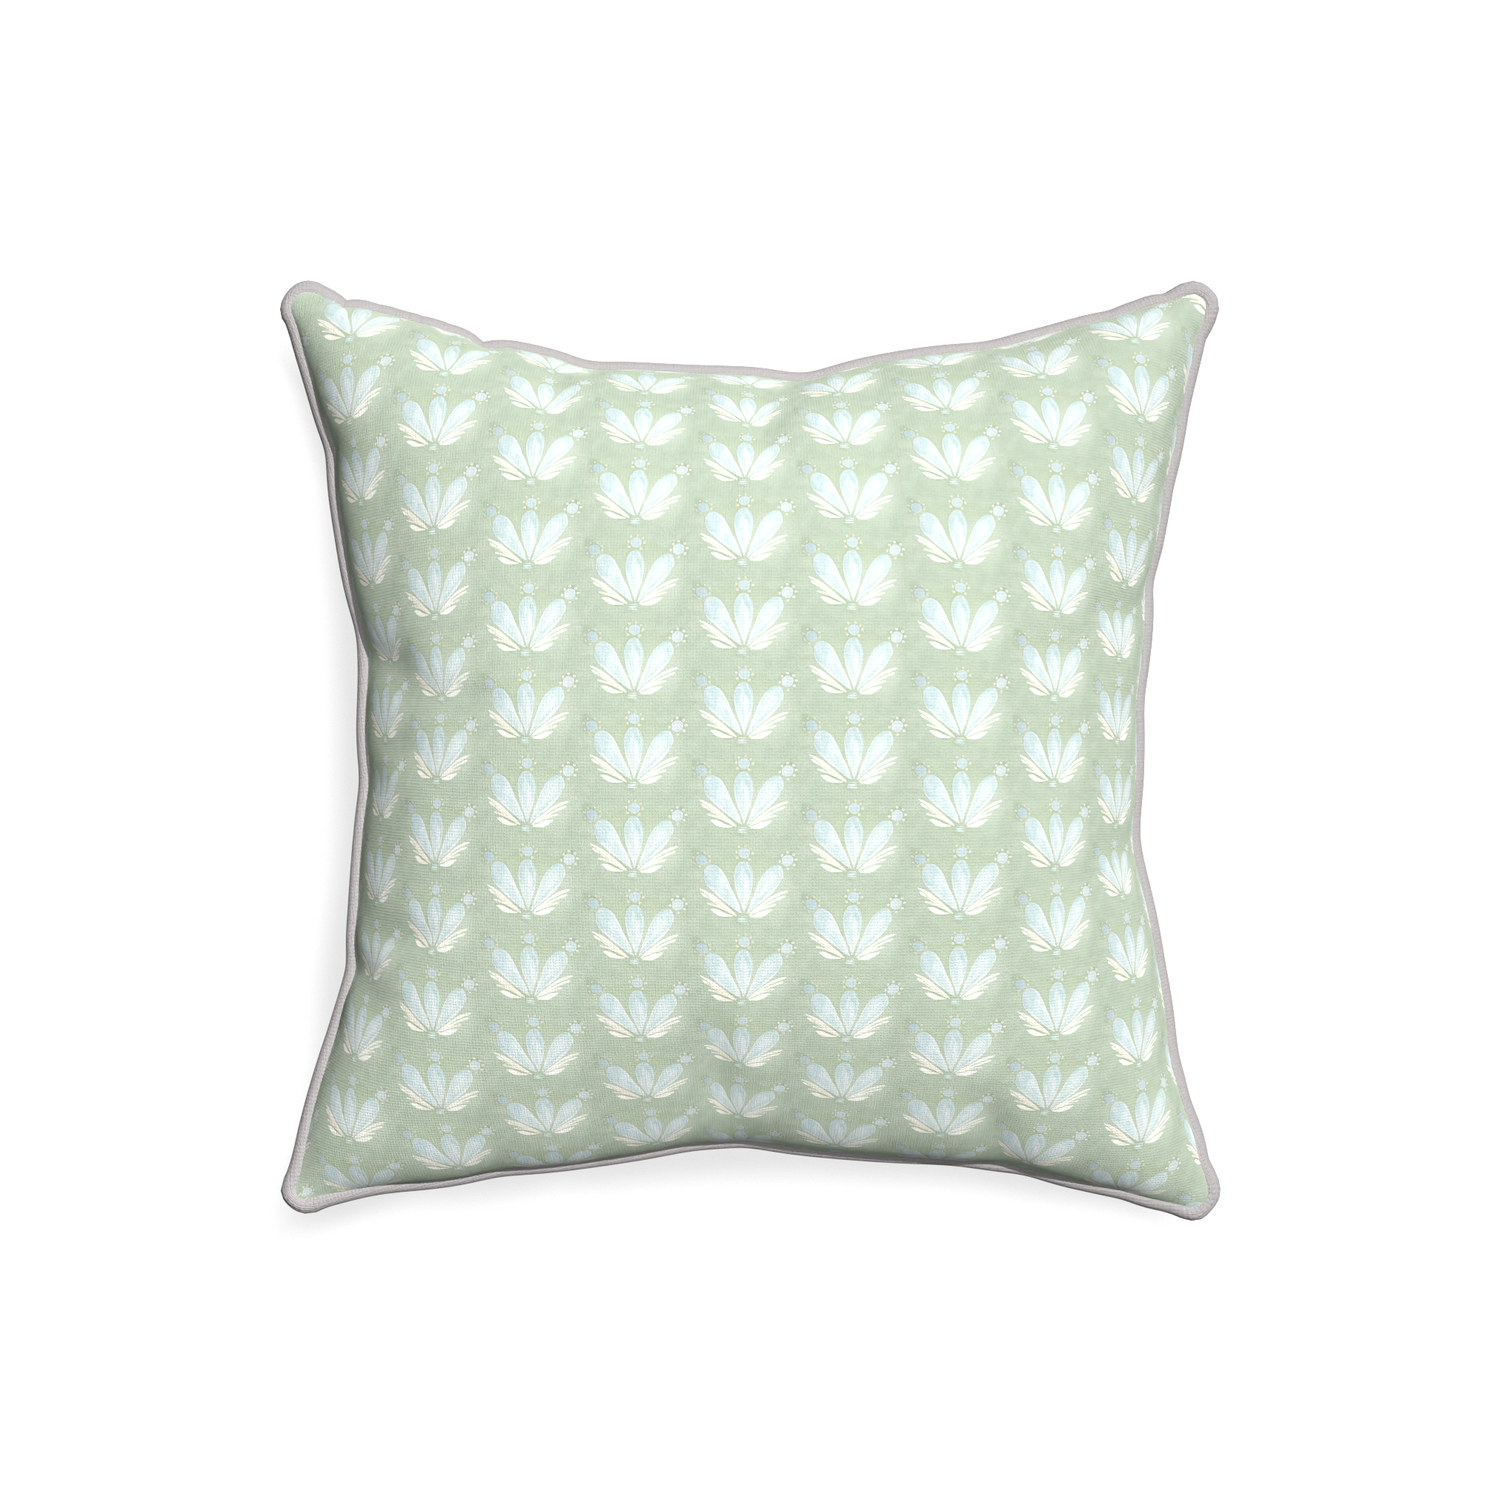 20-square serena sea salt custom blue & green floral drop repeatpillow with pebble piping on white background